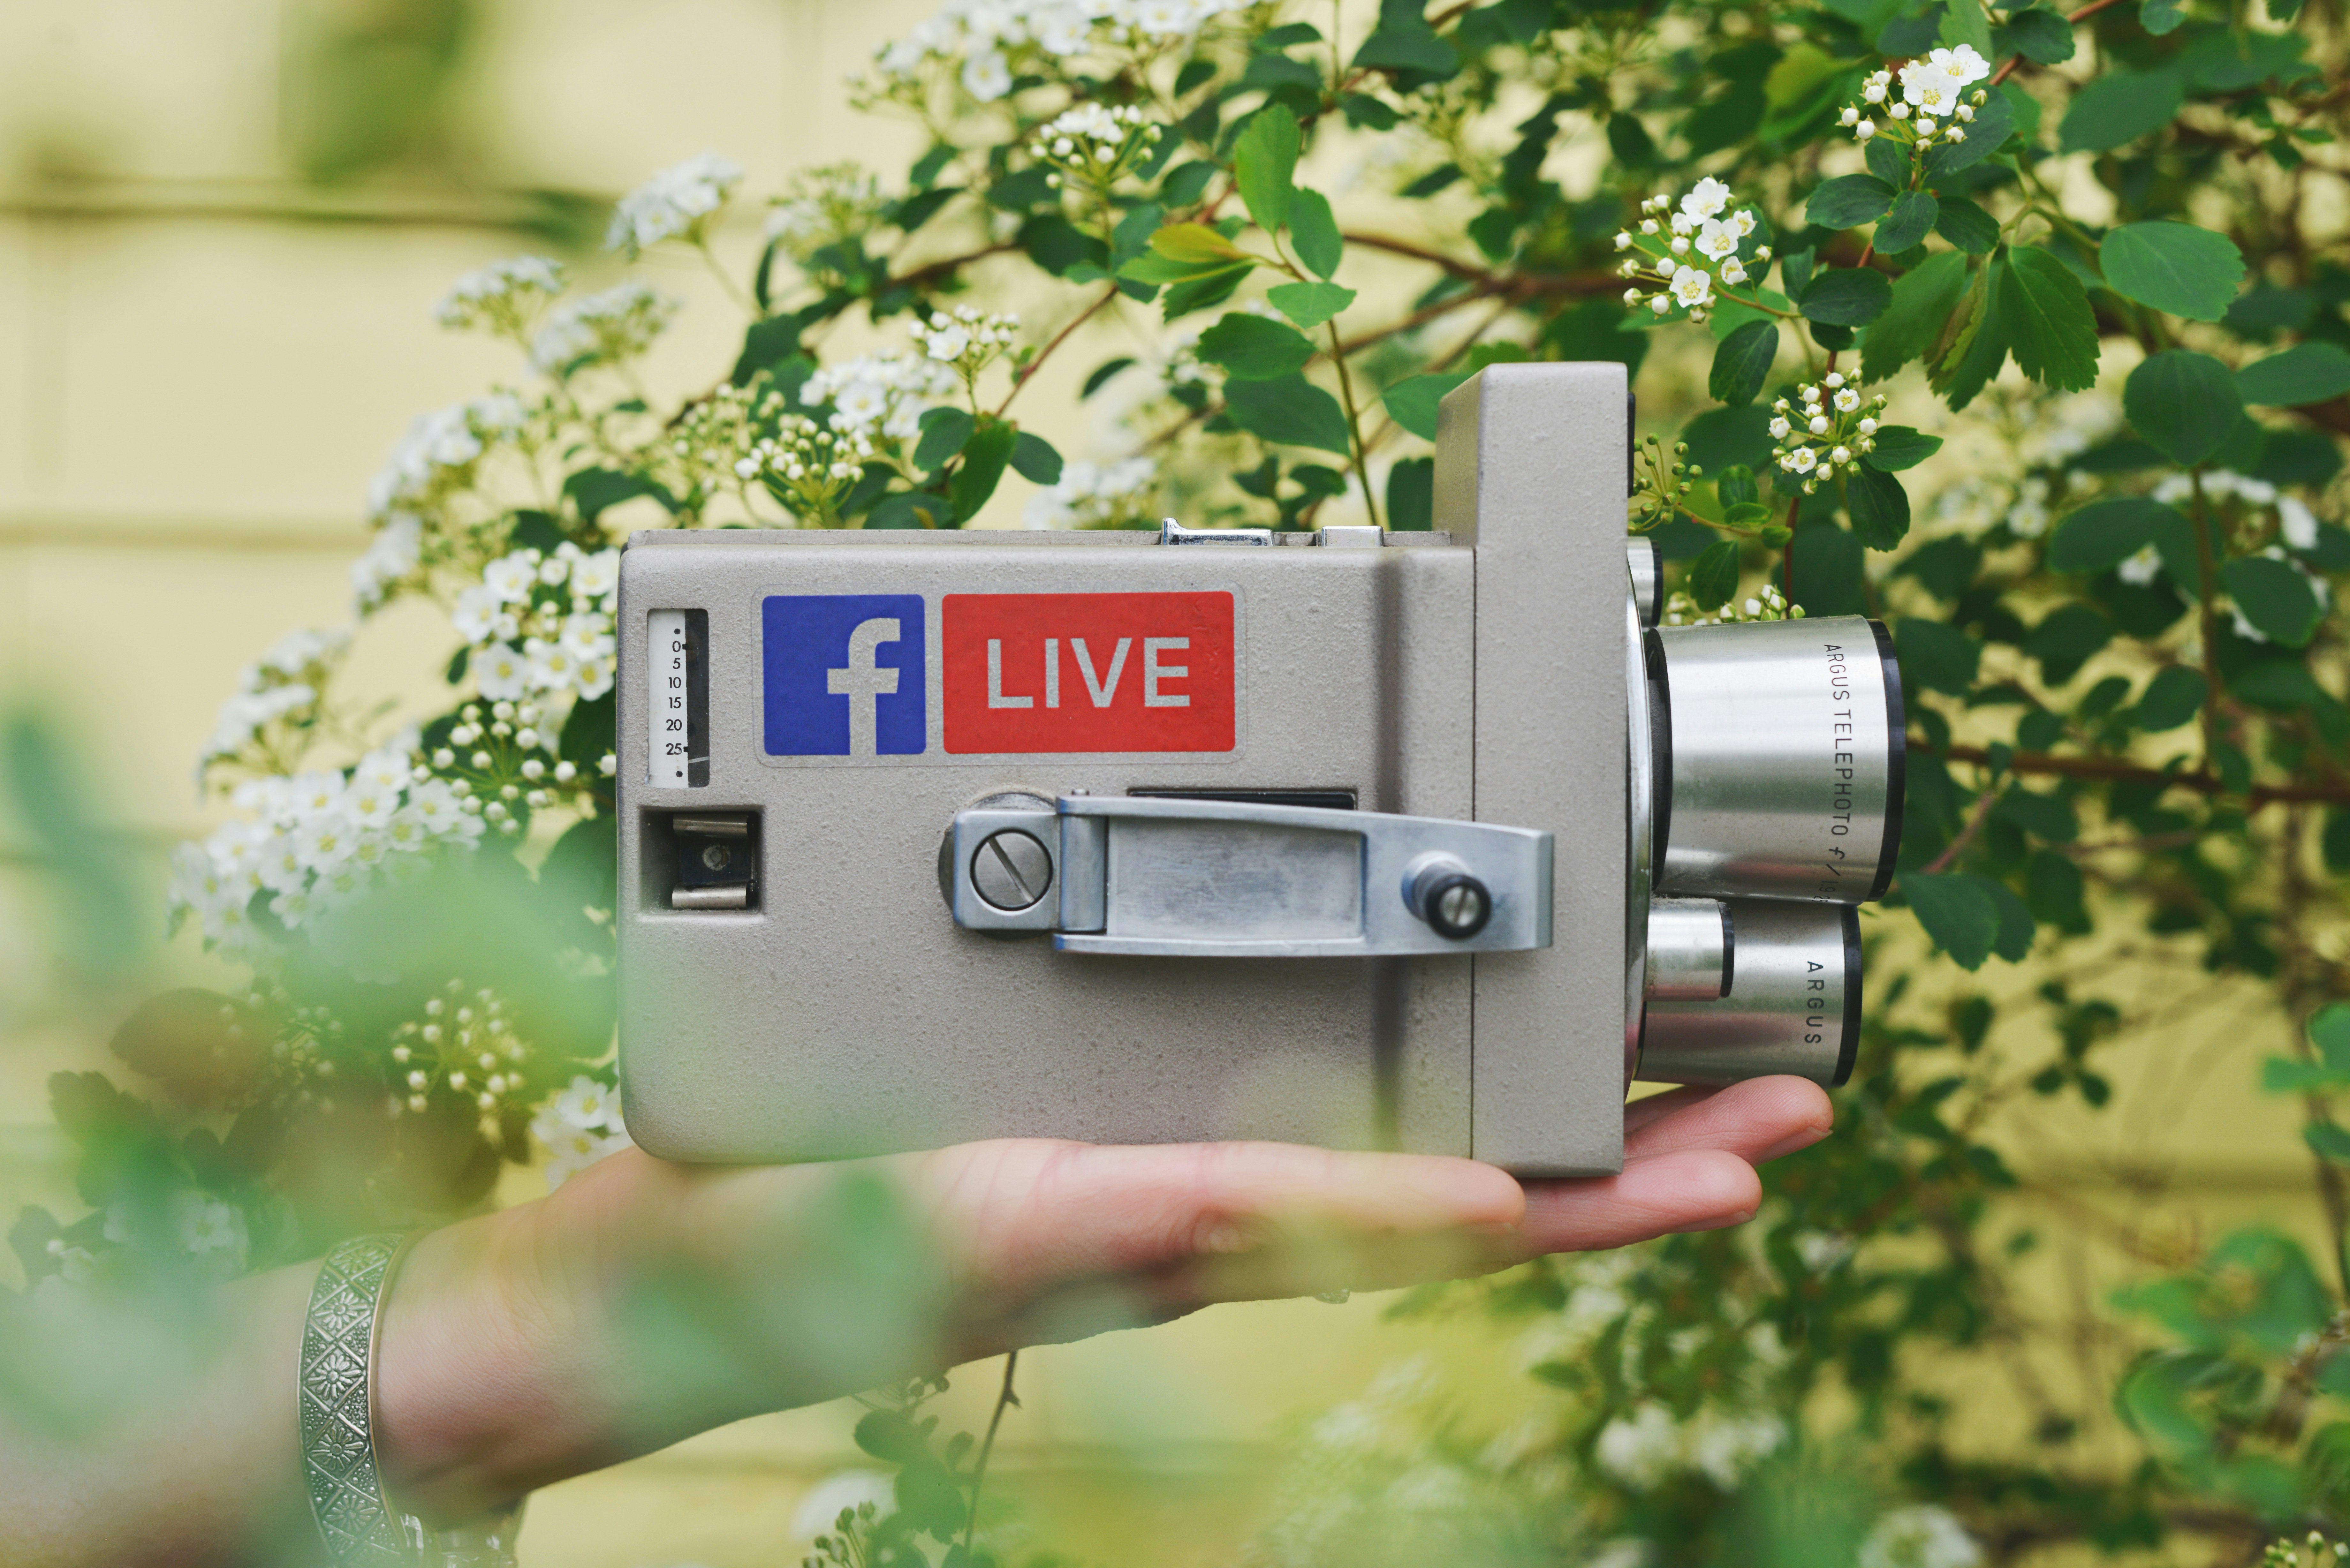 Sticker Mule Tip #2,524: Do not try using an old analog film camera to record your next Facebook Live video.